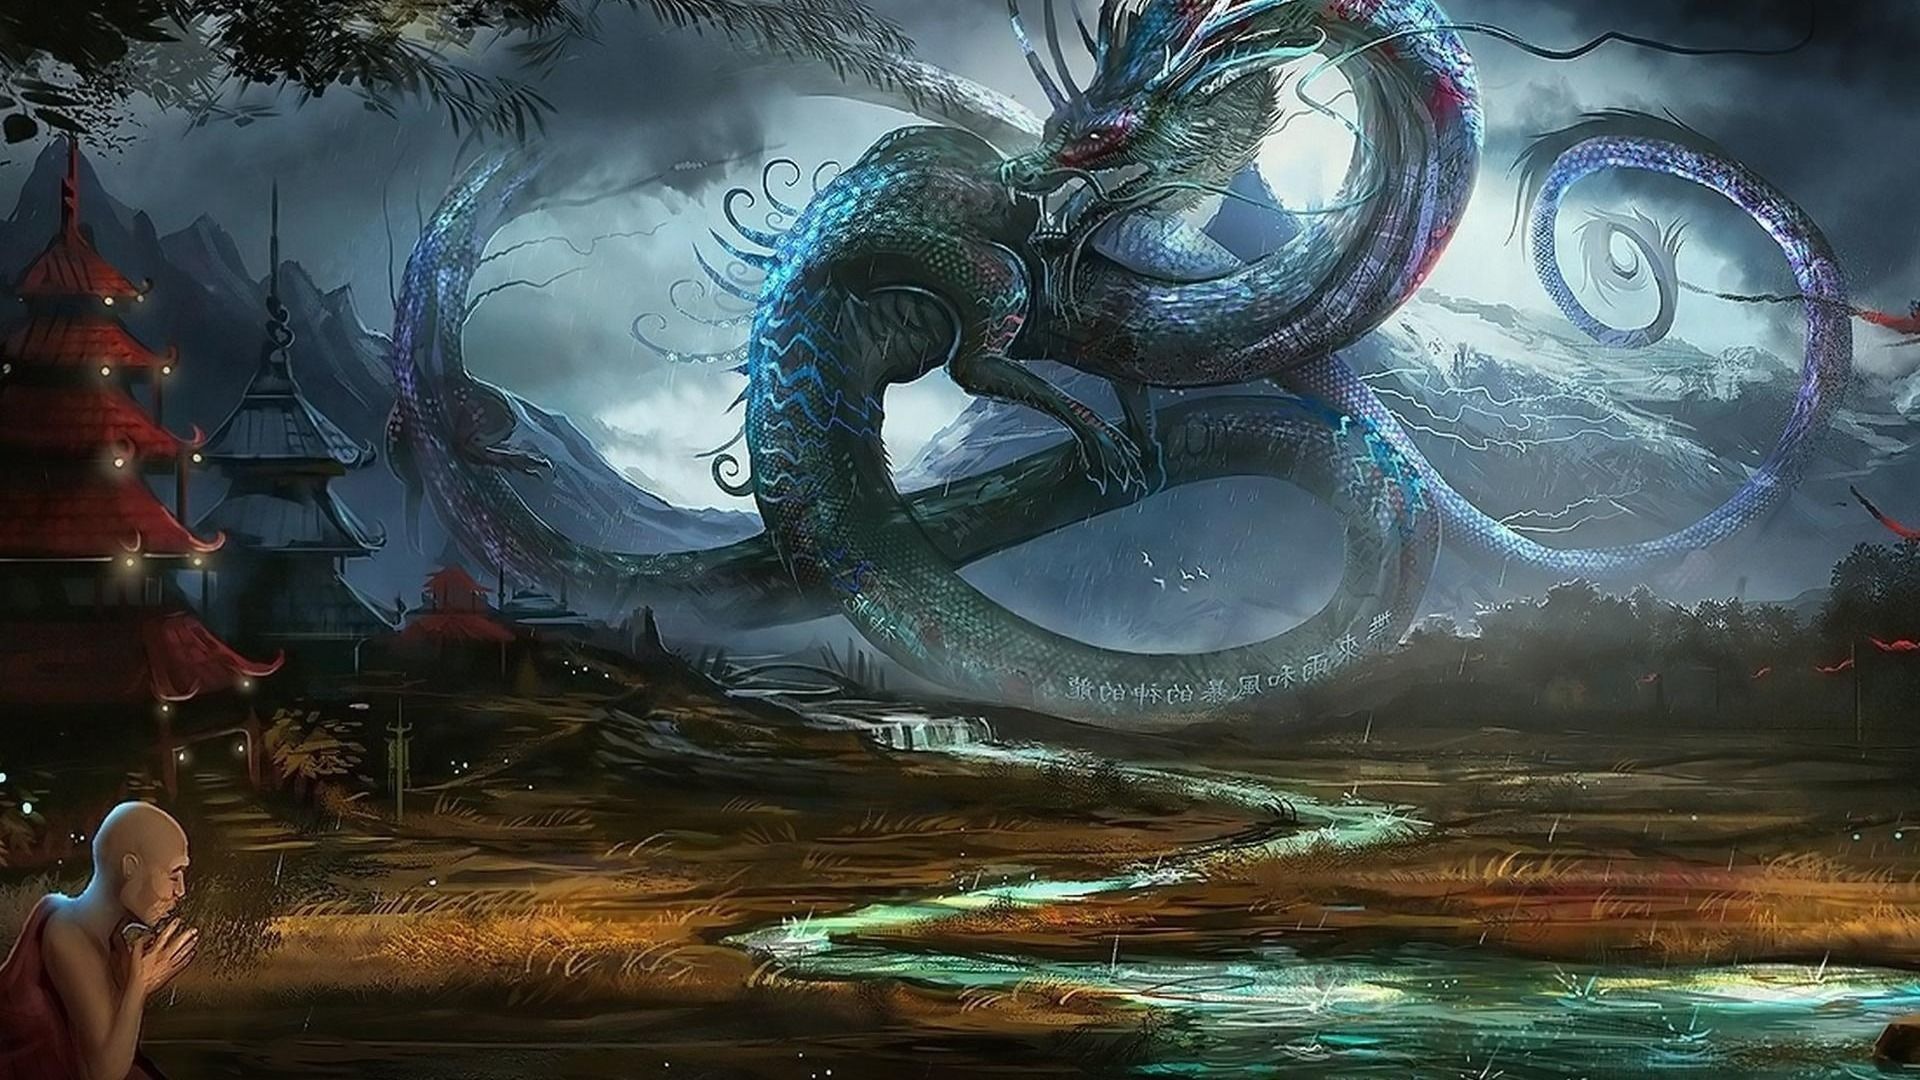 Eastern Dragon Wallpapers